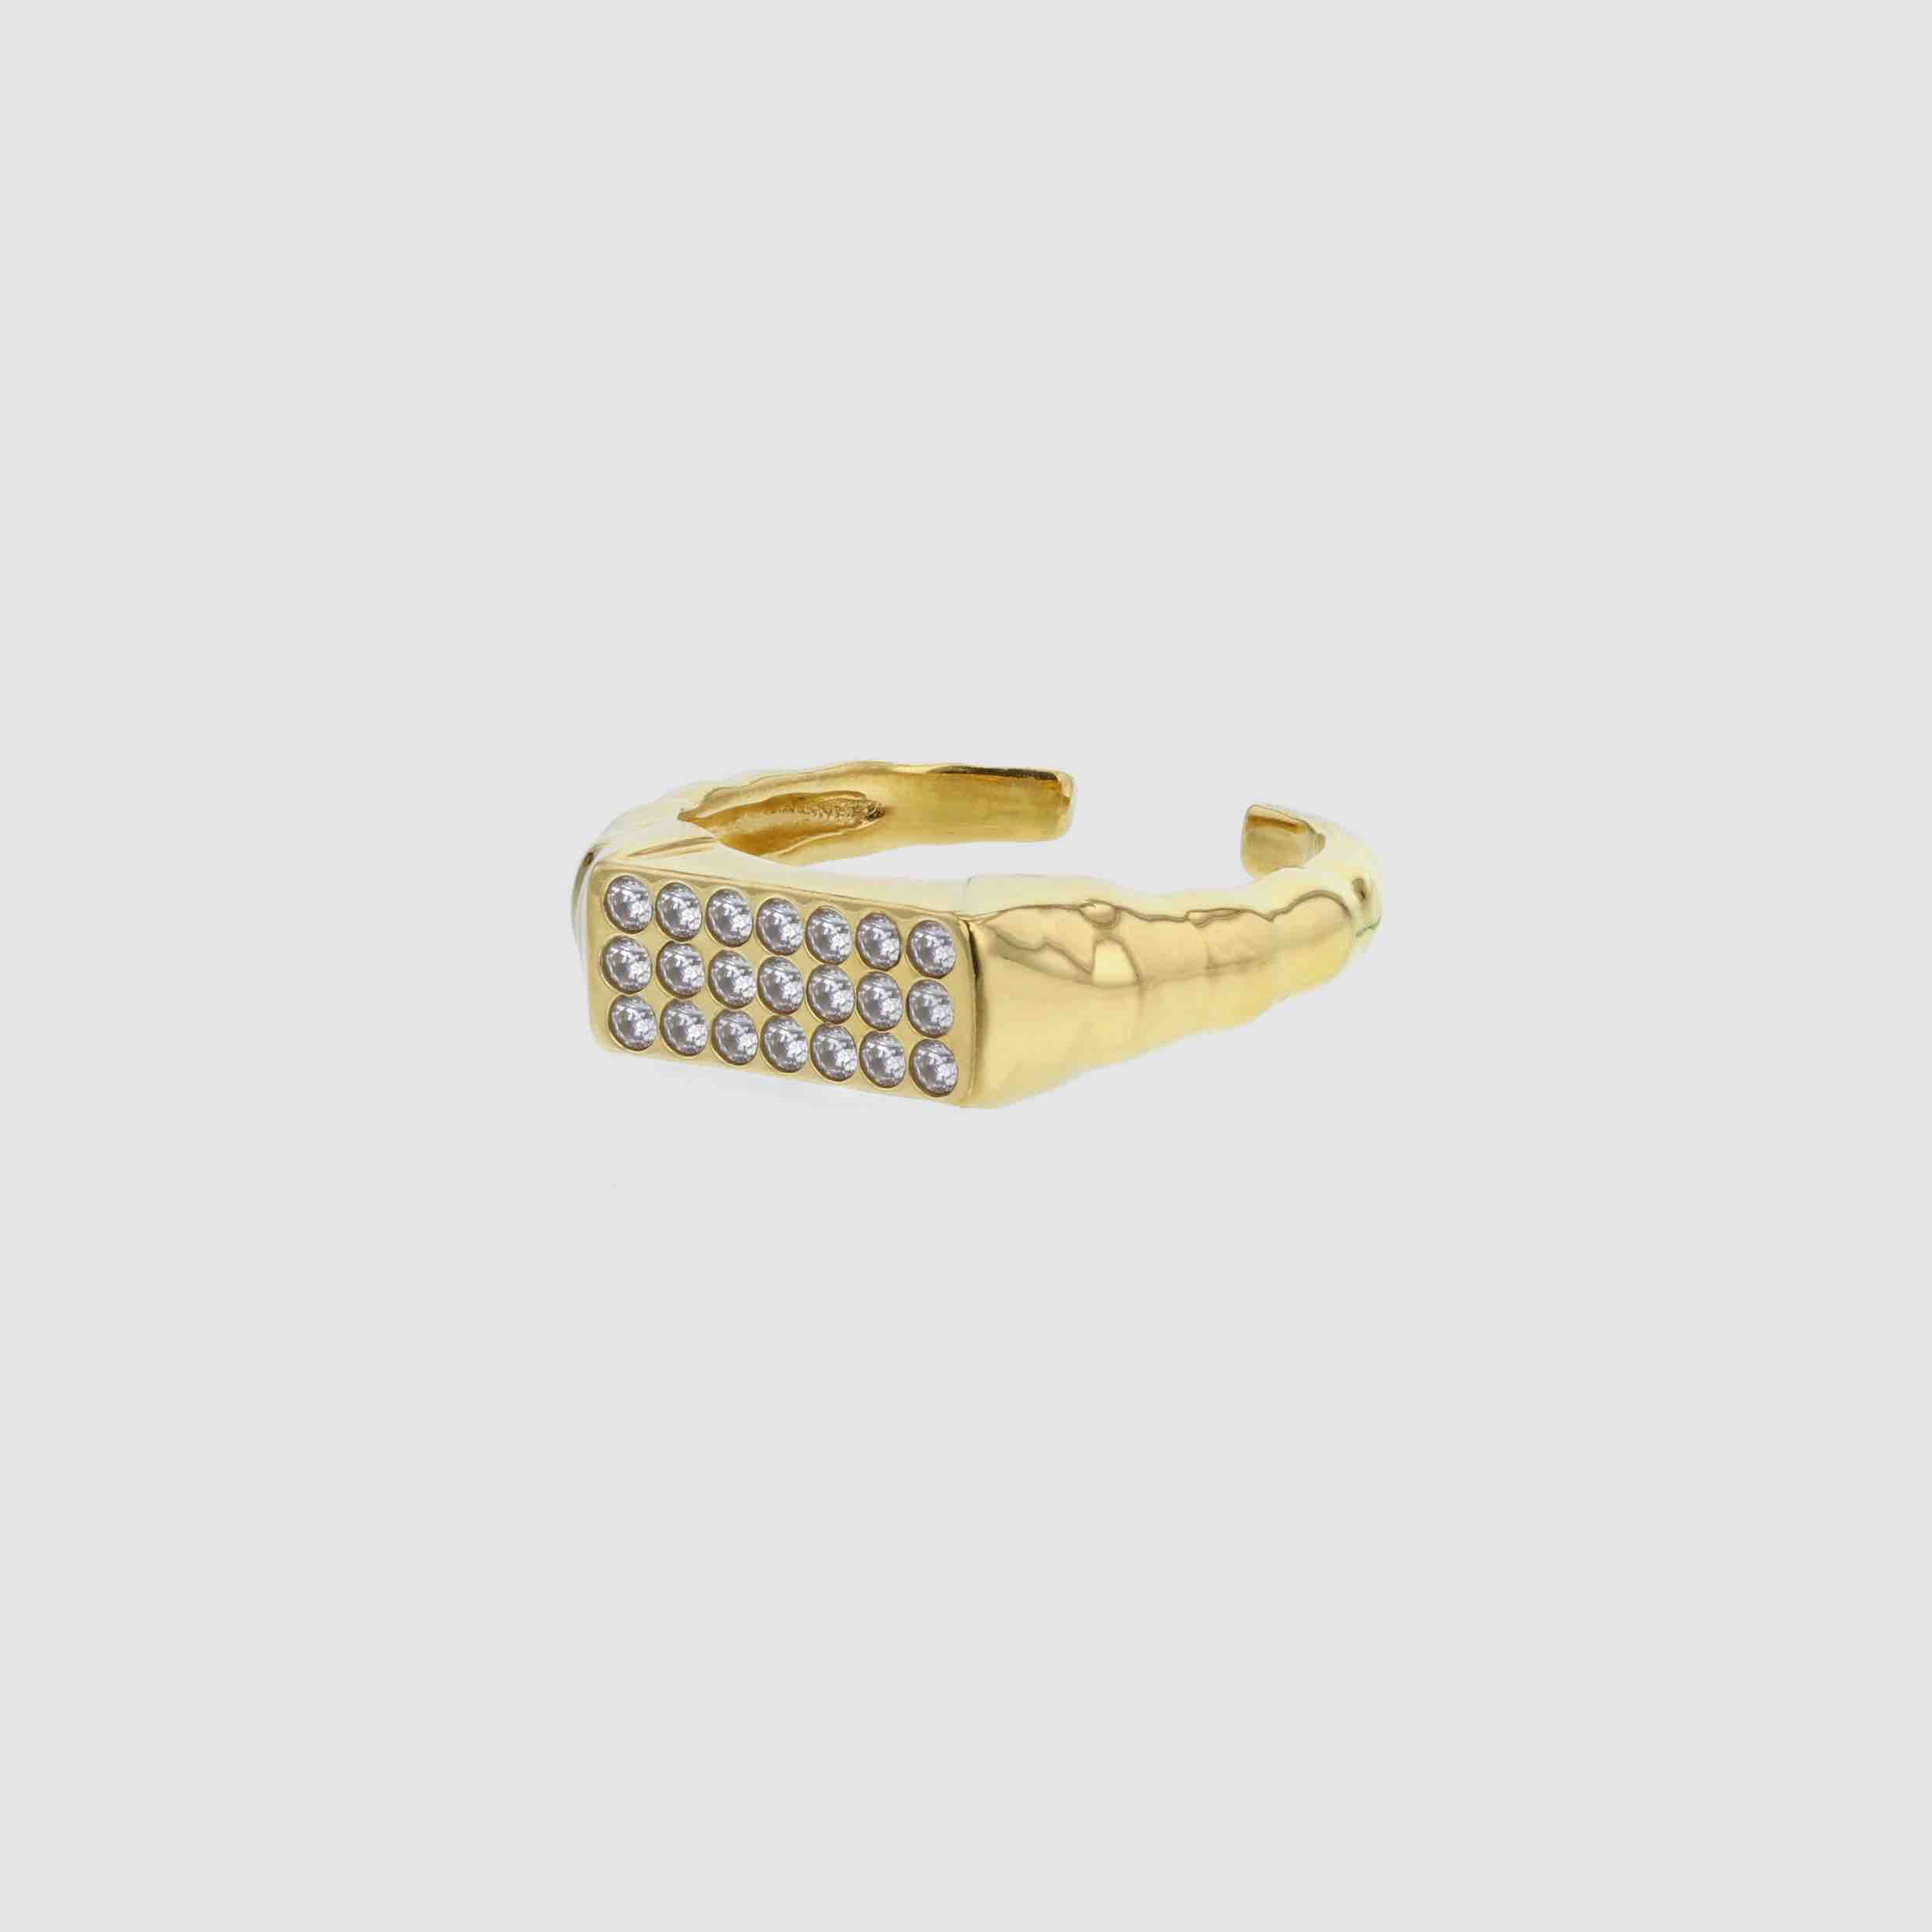 Bedazzeled ring white made in gold plated recycled silver from Hasla Jewelry Ring fra Hasla norsk design